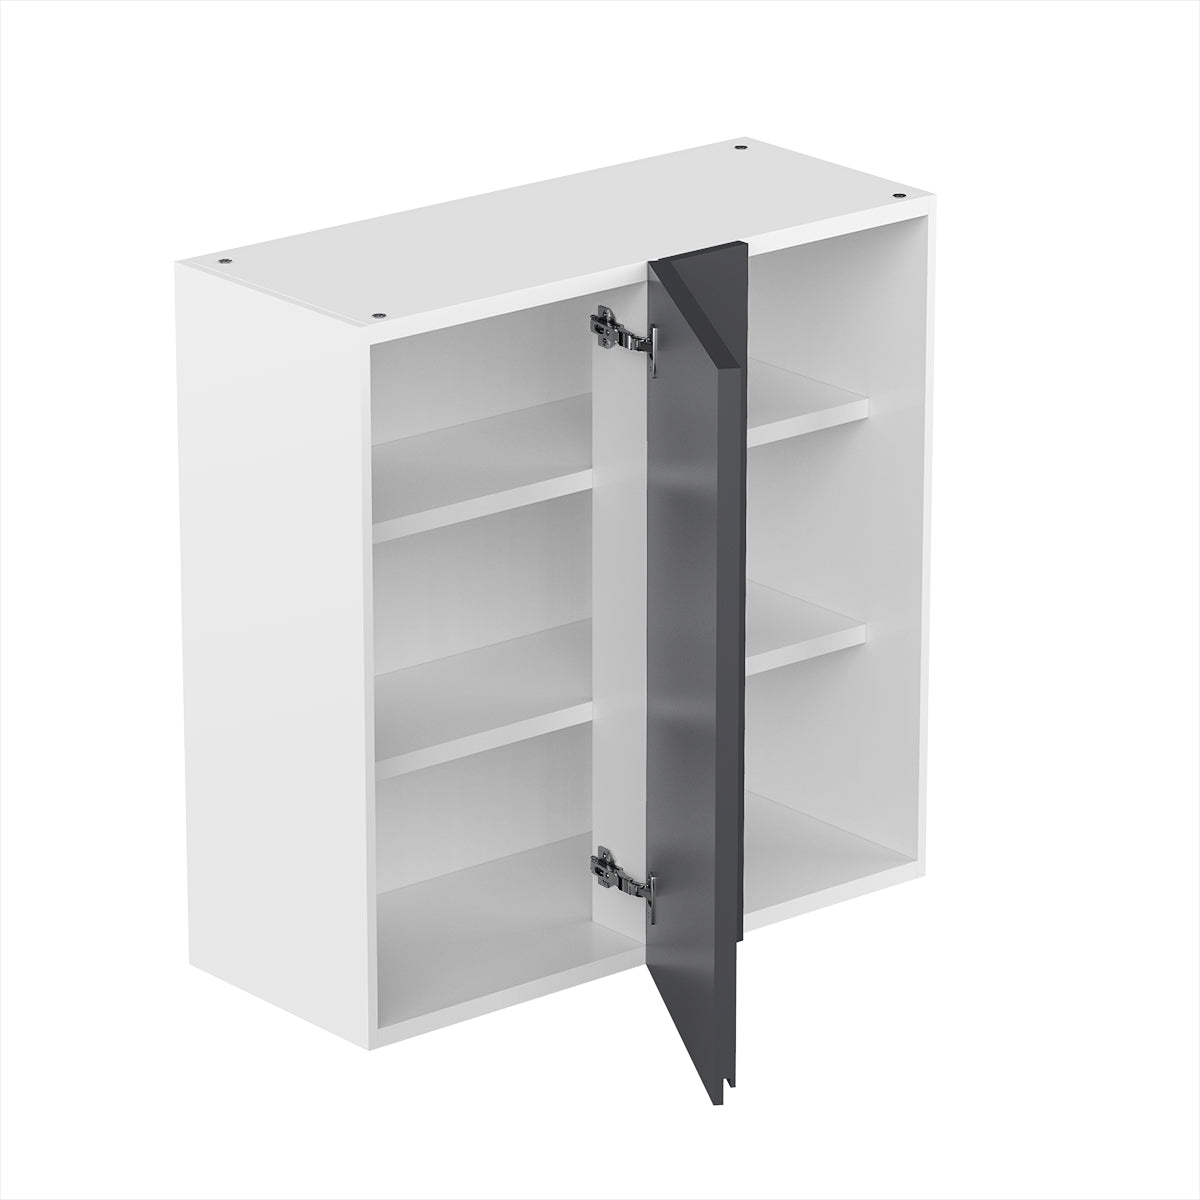 RTA - Lacquer Grey - Single Door Wall Cabinets | 30"W x 30"H x 12"D